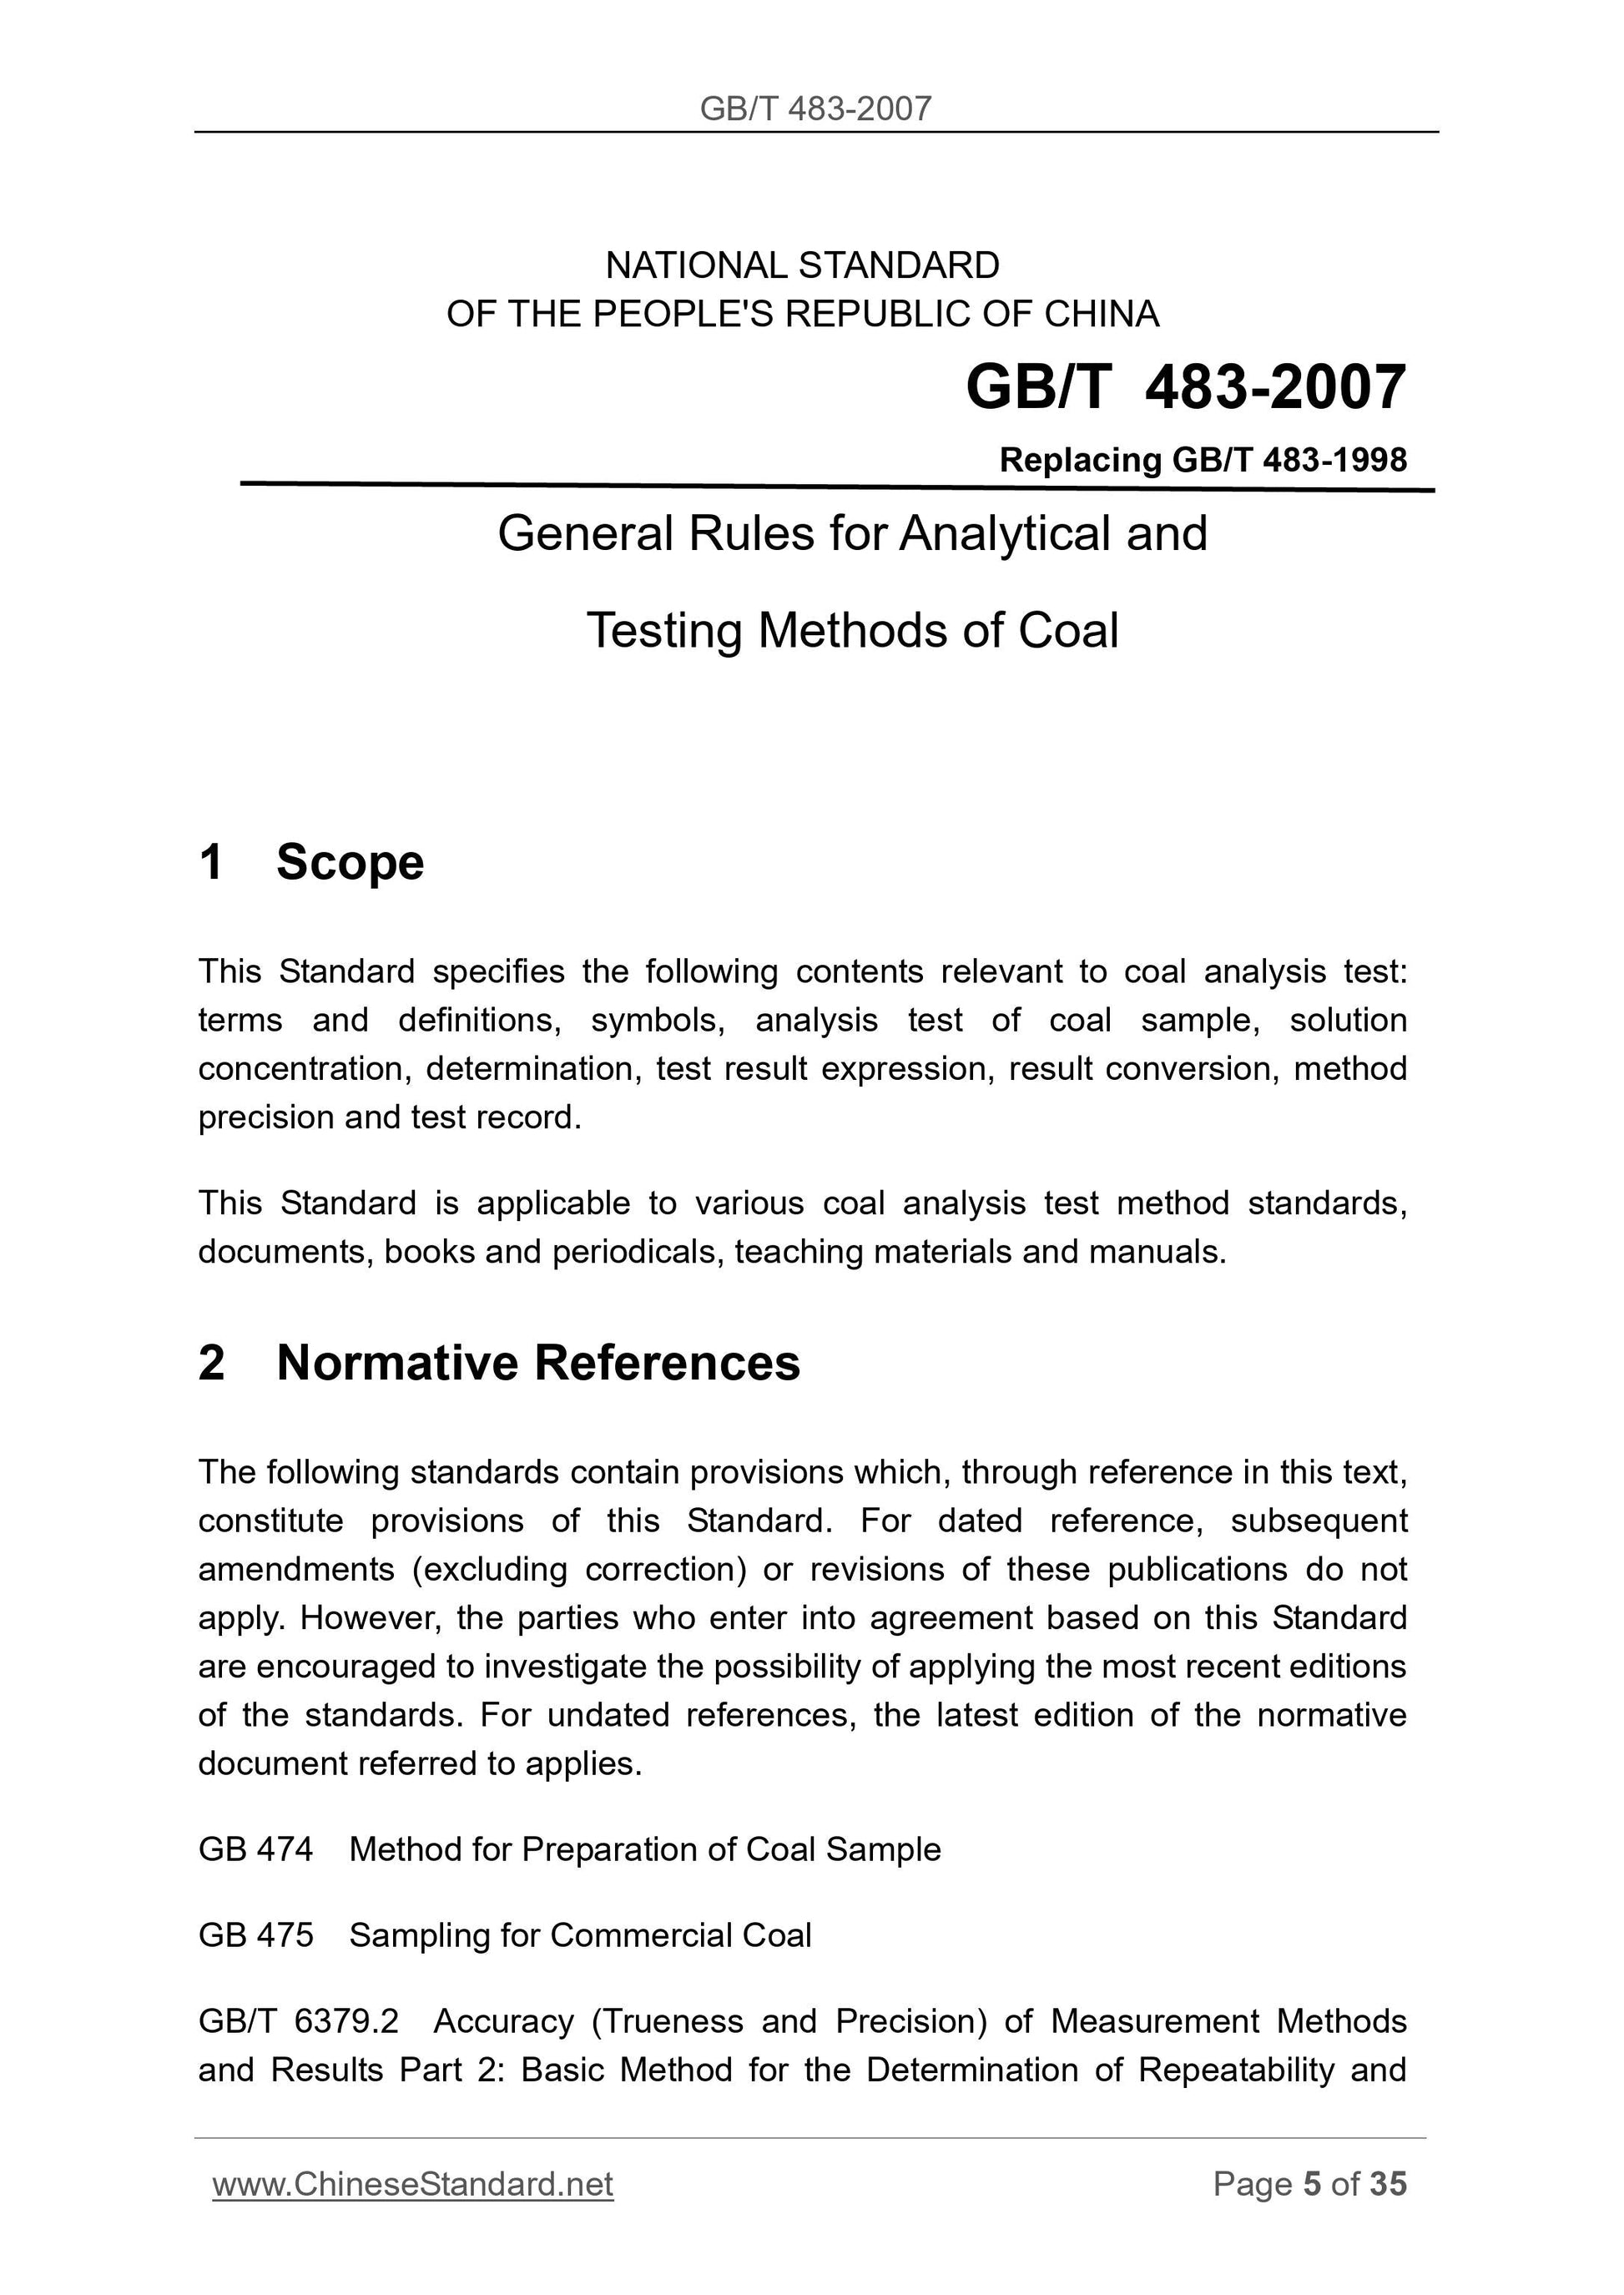 GB/T 483-2007 Page 4